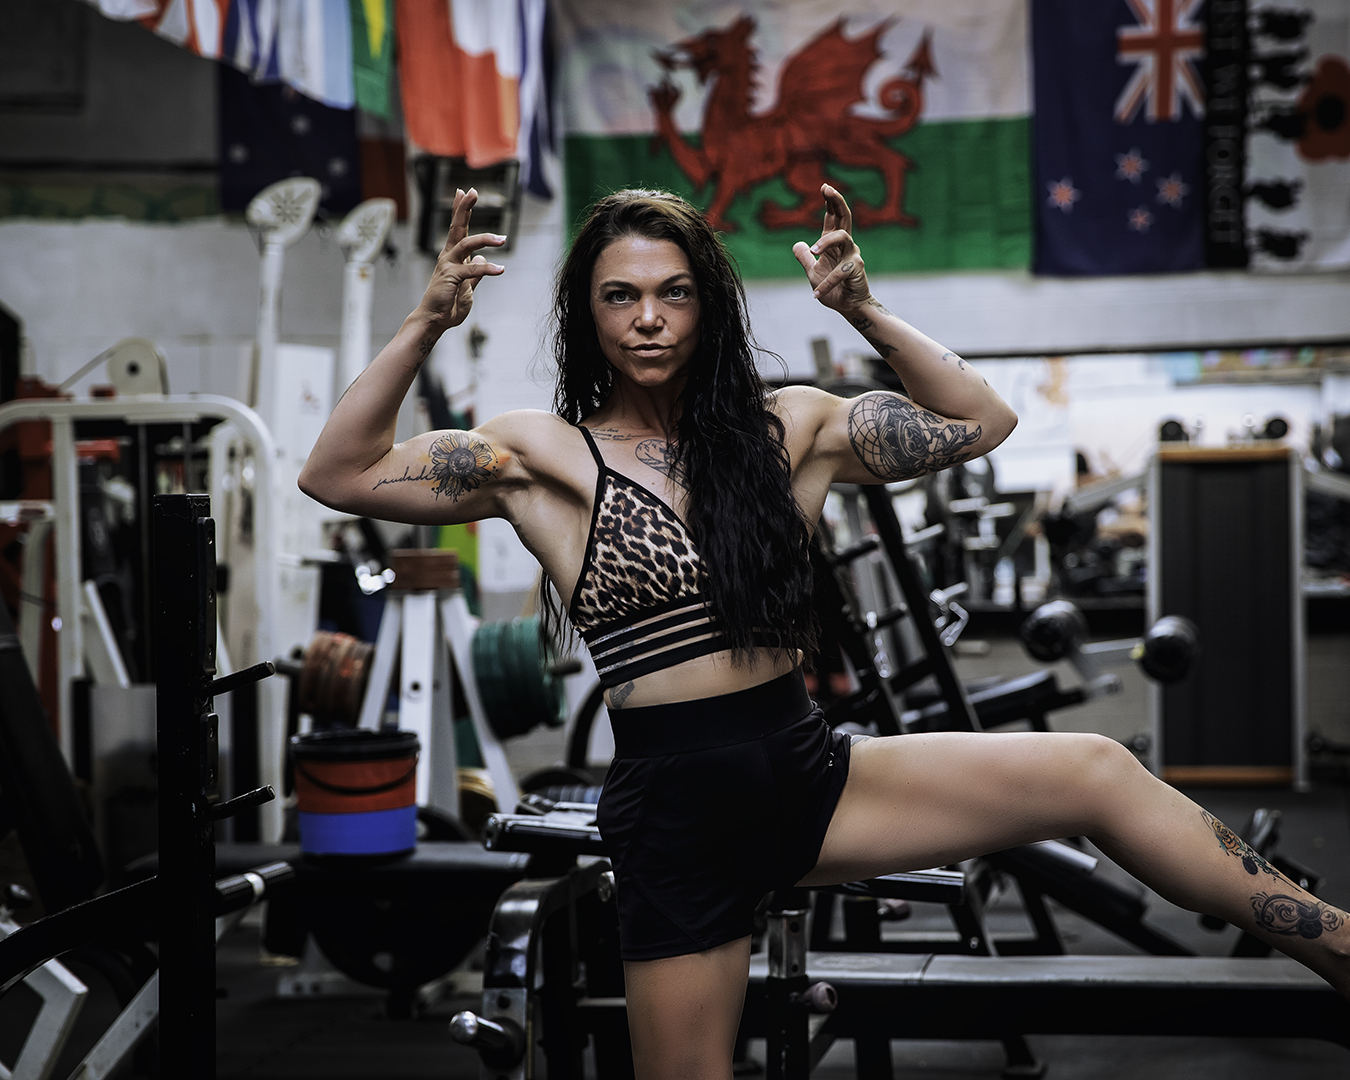 Rhiannon. Weightlifting brings strength and confidence.